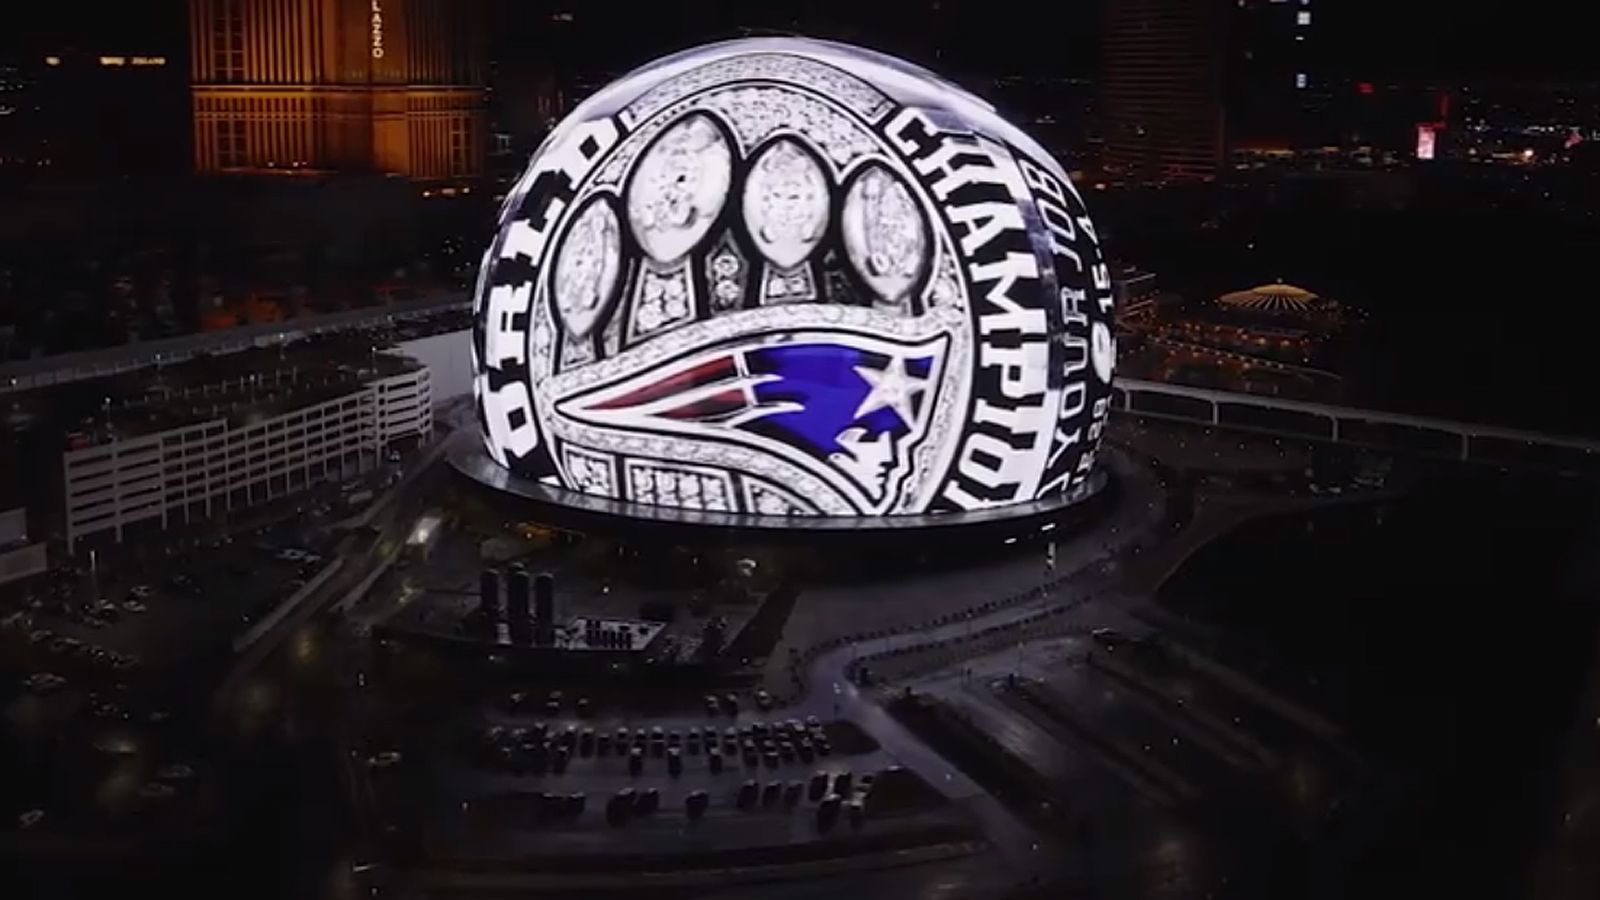 <strong>2015 - New England Patriots</strong><br>Super Bowl: New England Patriots - Seattle Seahawks 28:24